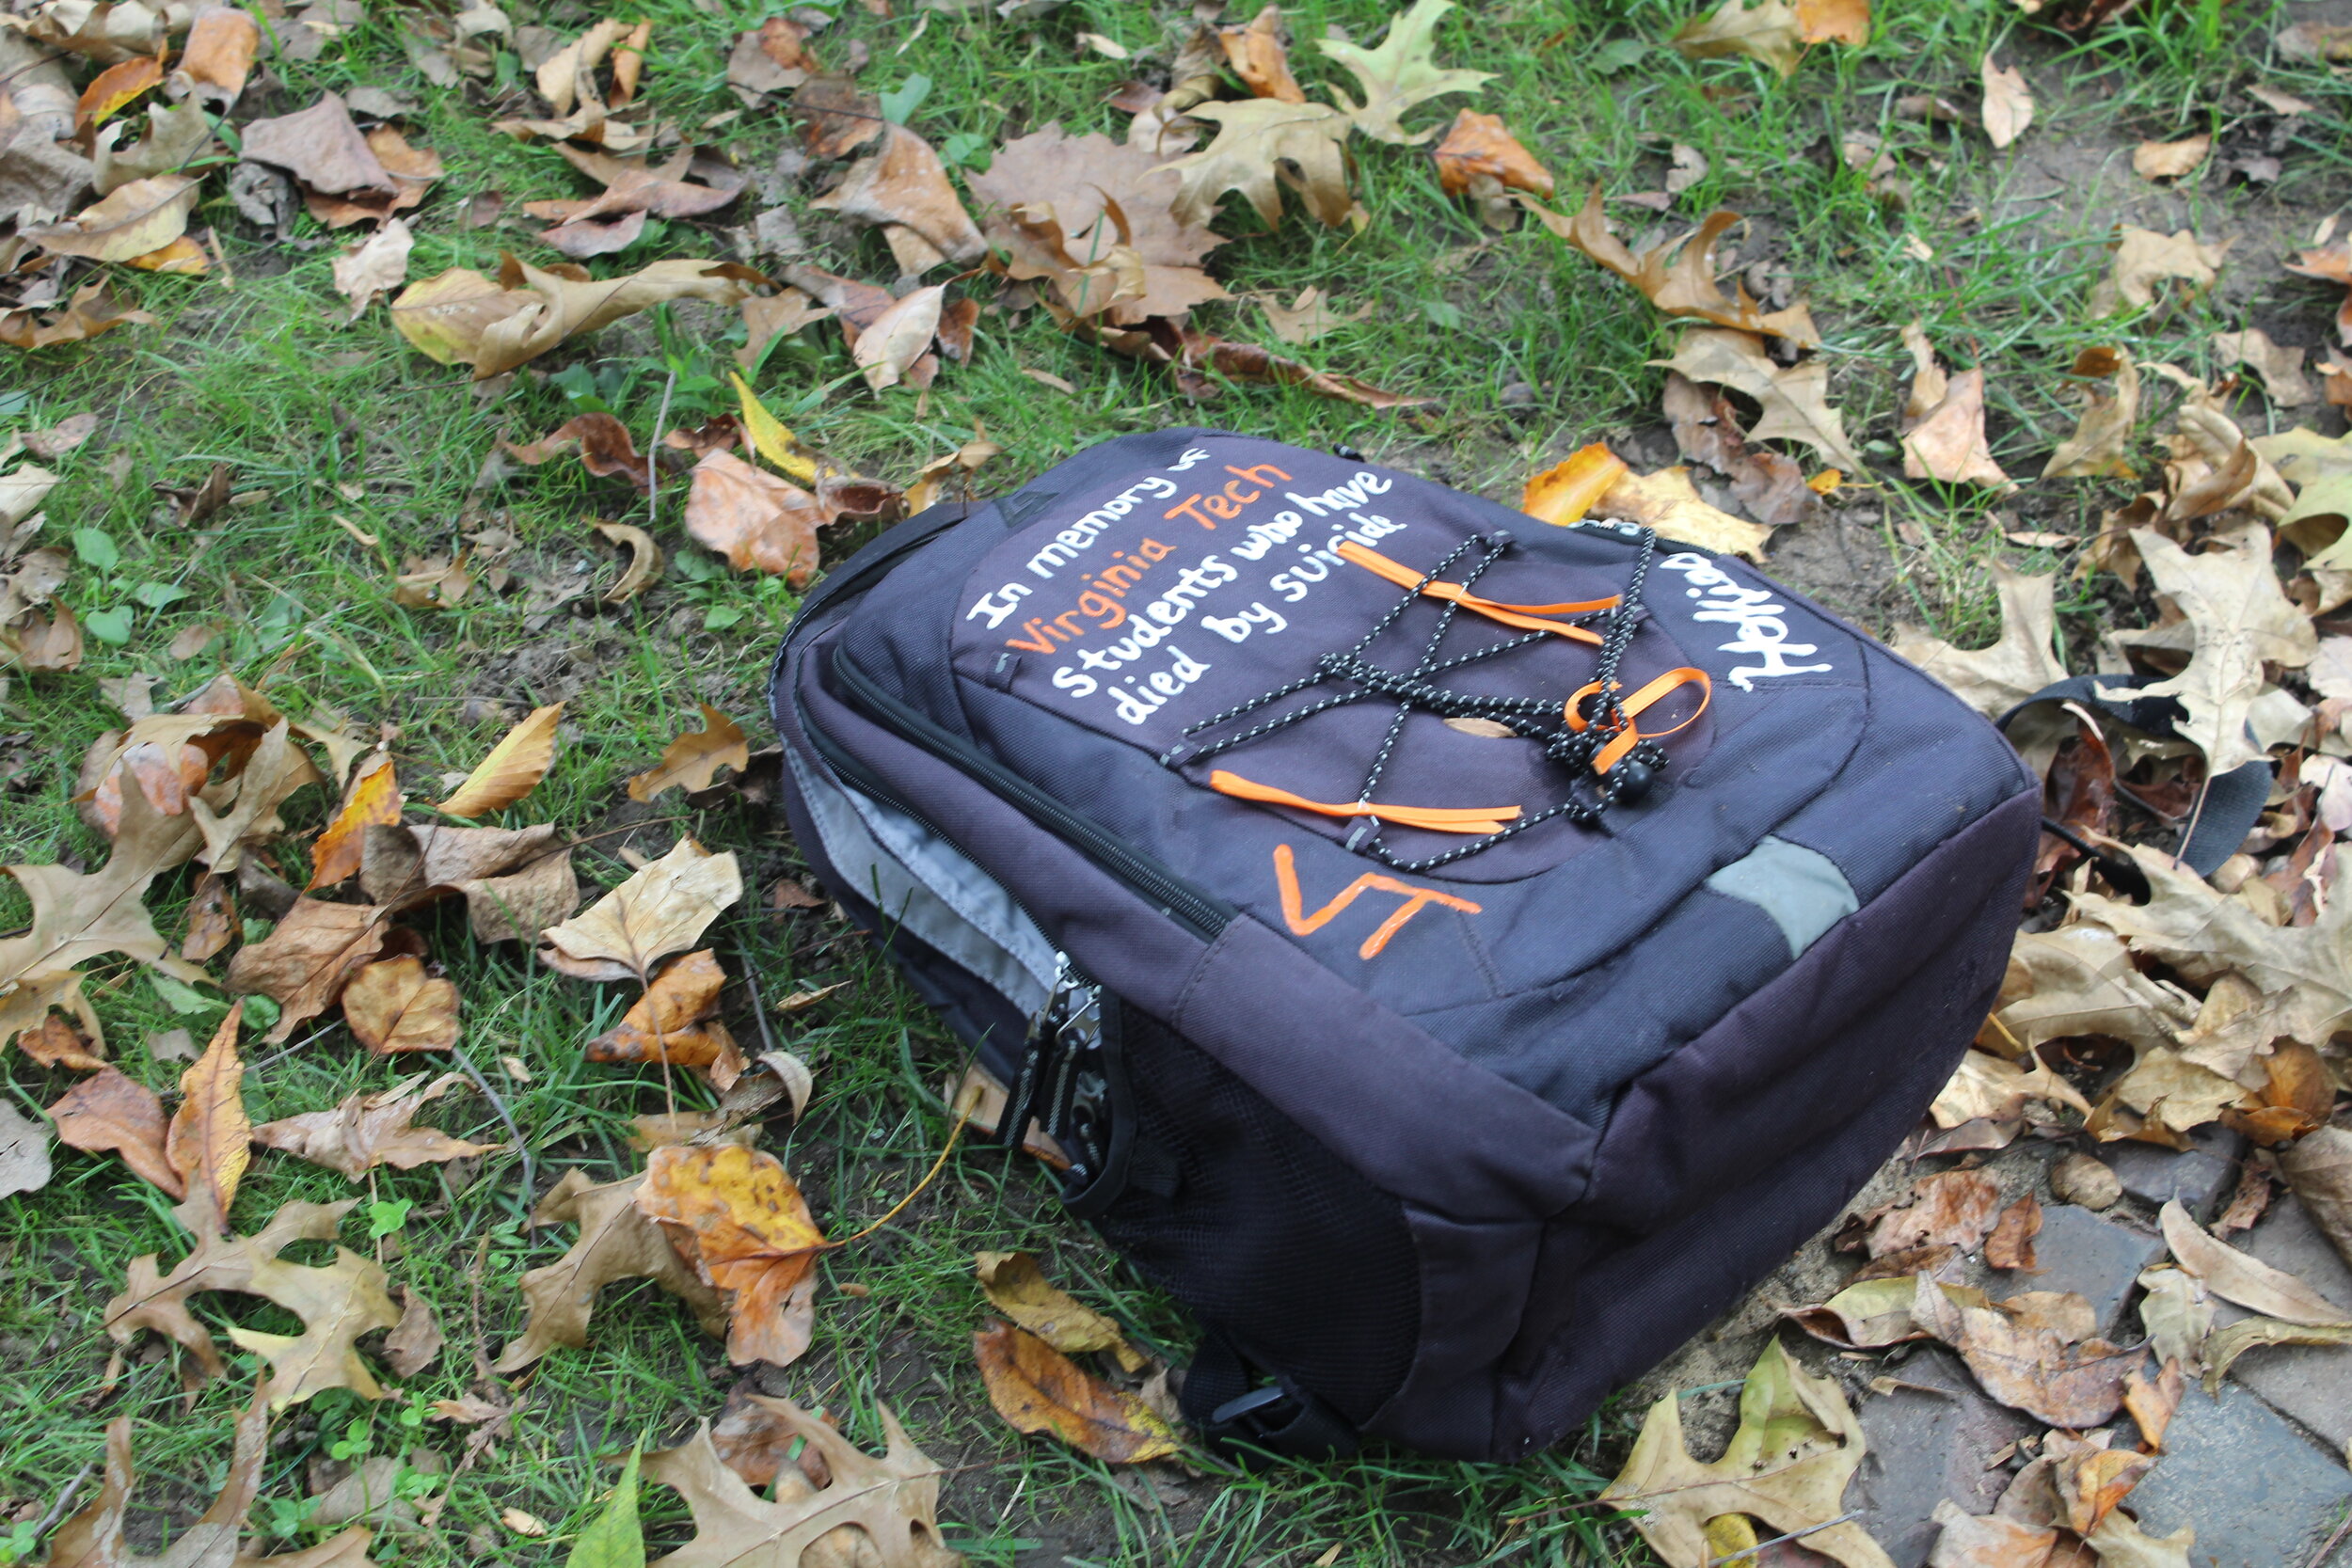  A book bag donated by Virginia Tech is displayed to commemorate students who have died by suicide. Photo by Emily Zeiler. 